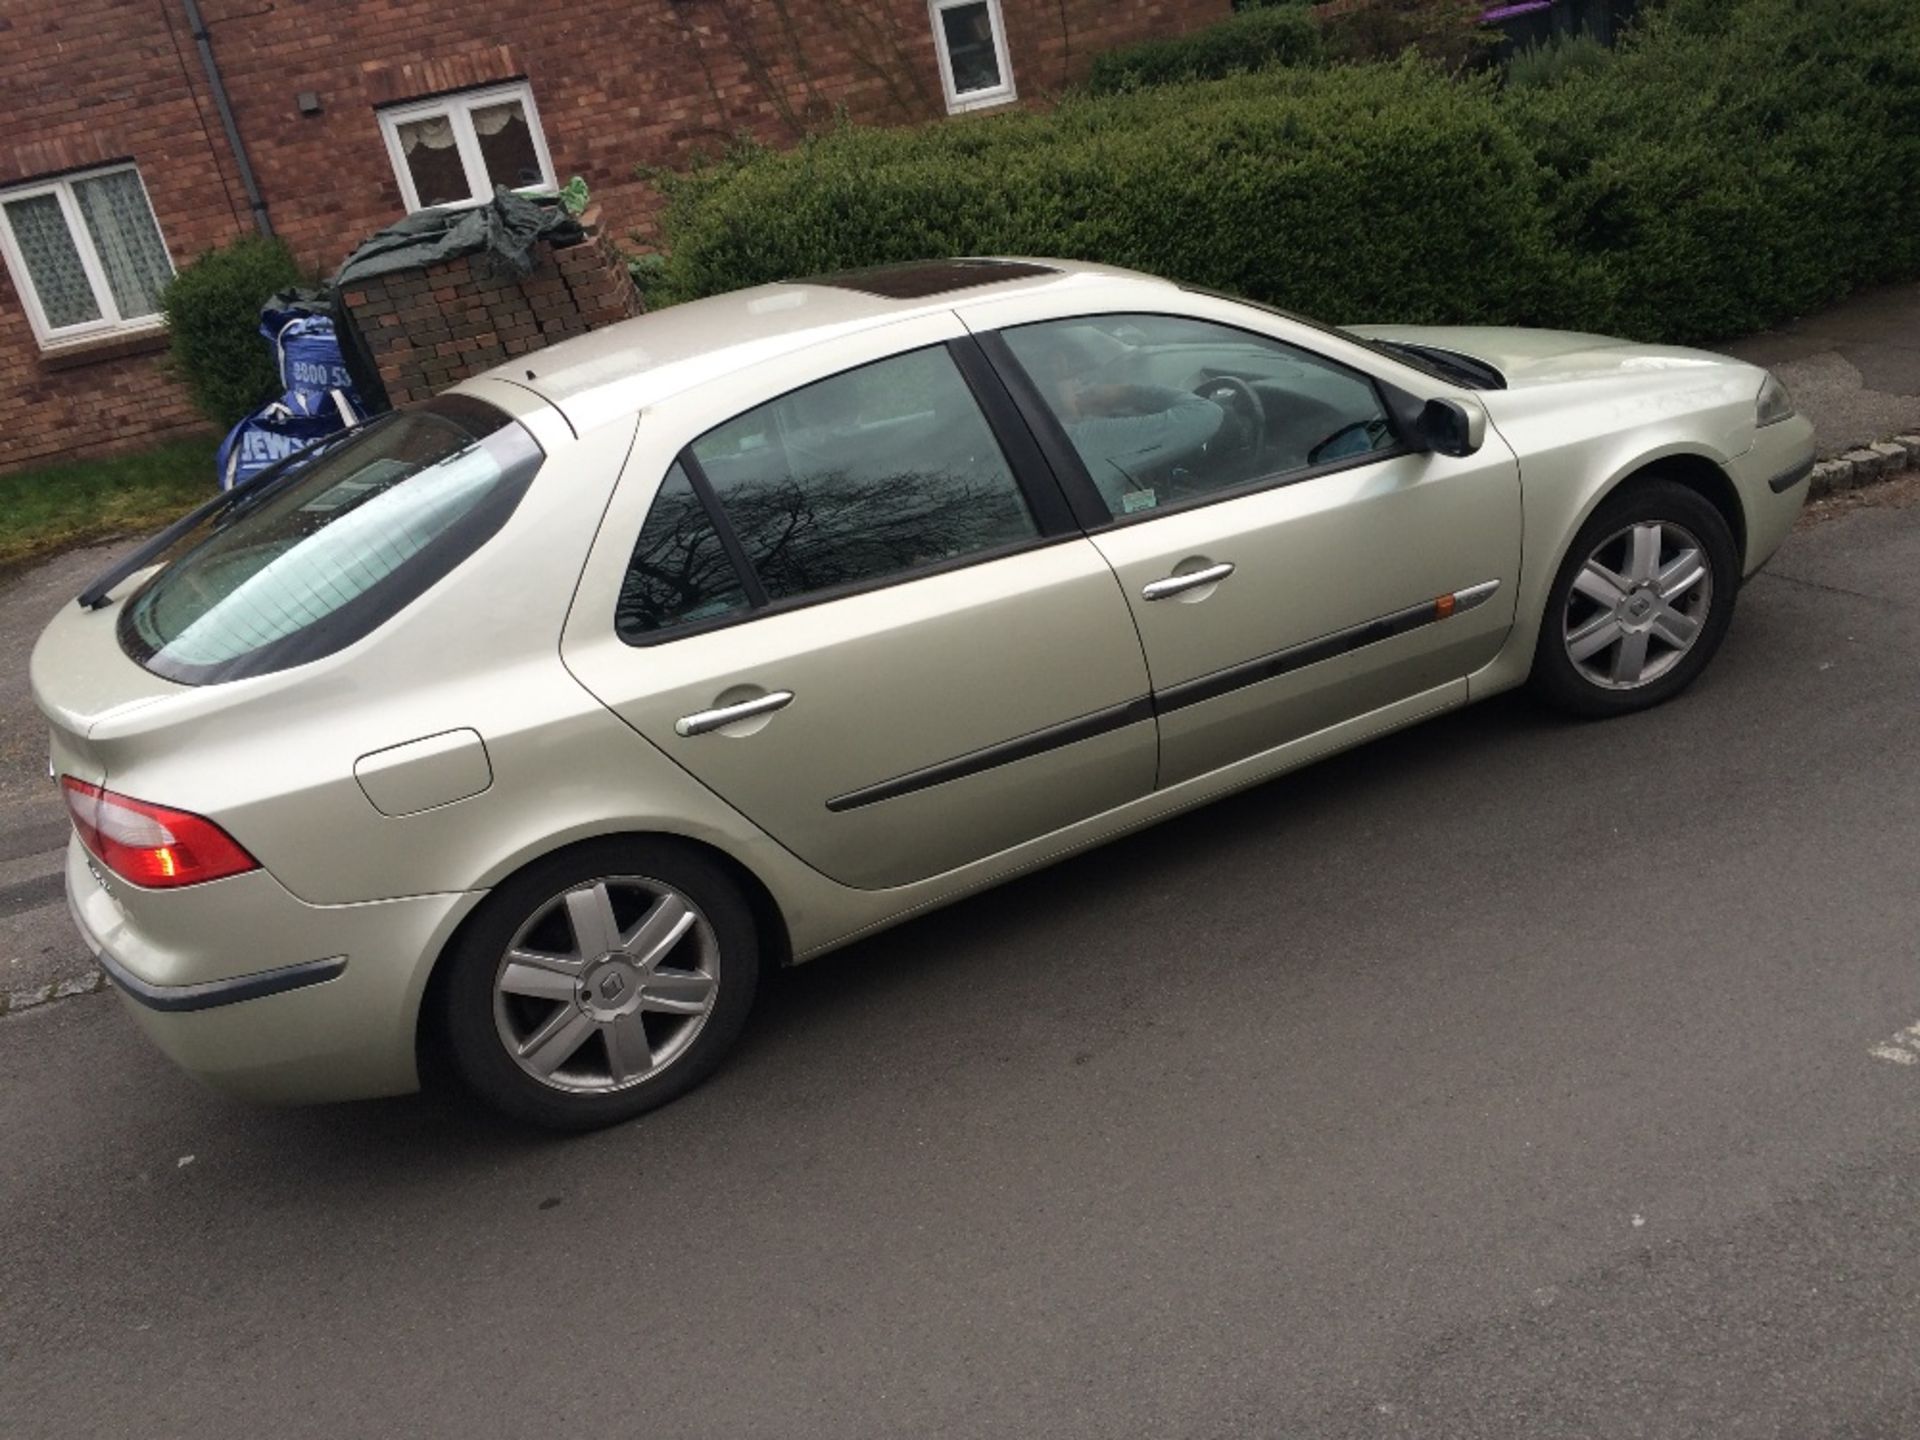 Renault Laguna 04 Reg Leather Interior Current Mot Until July 2017 Being Used Daily 99K Miles